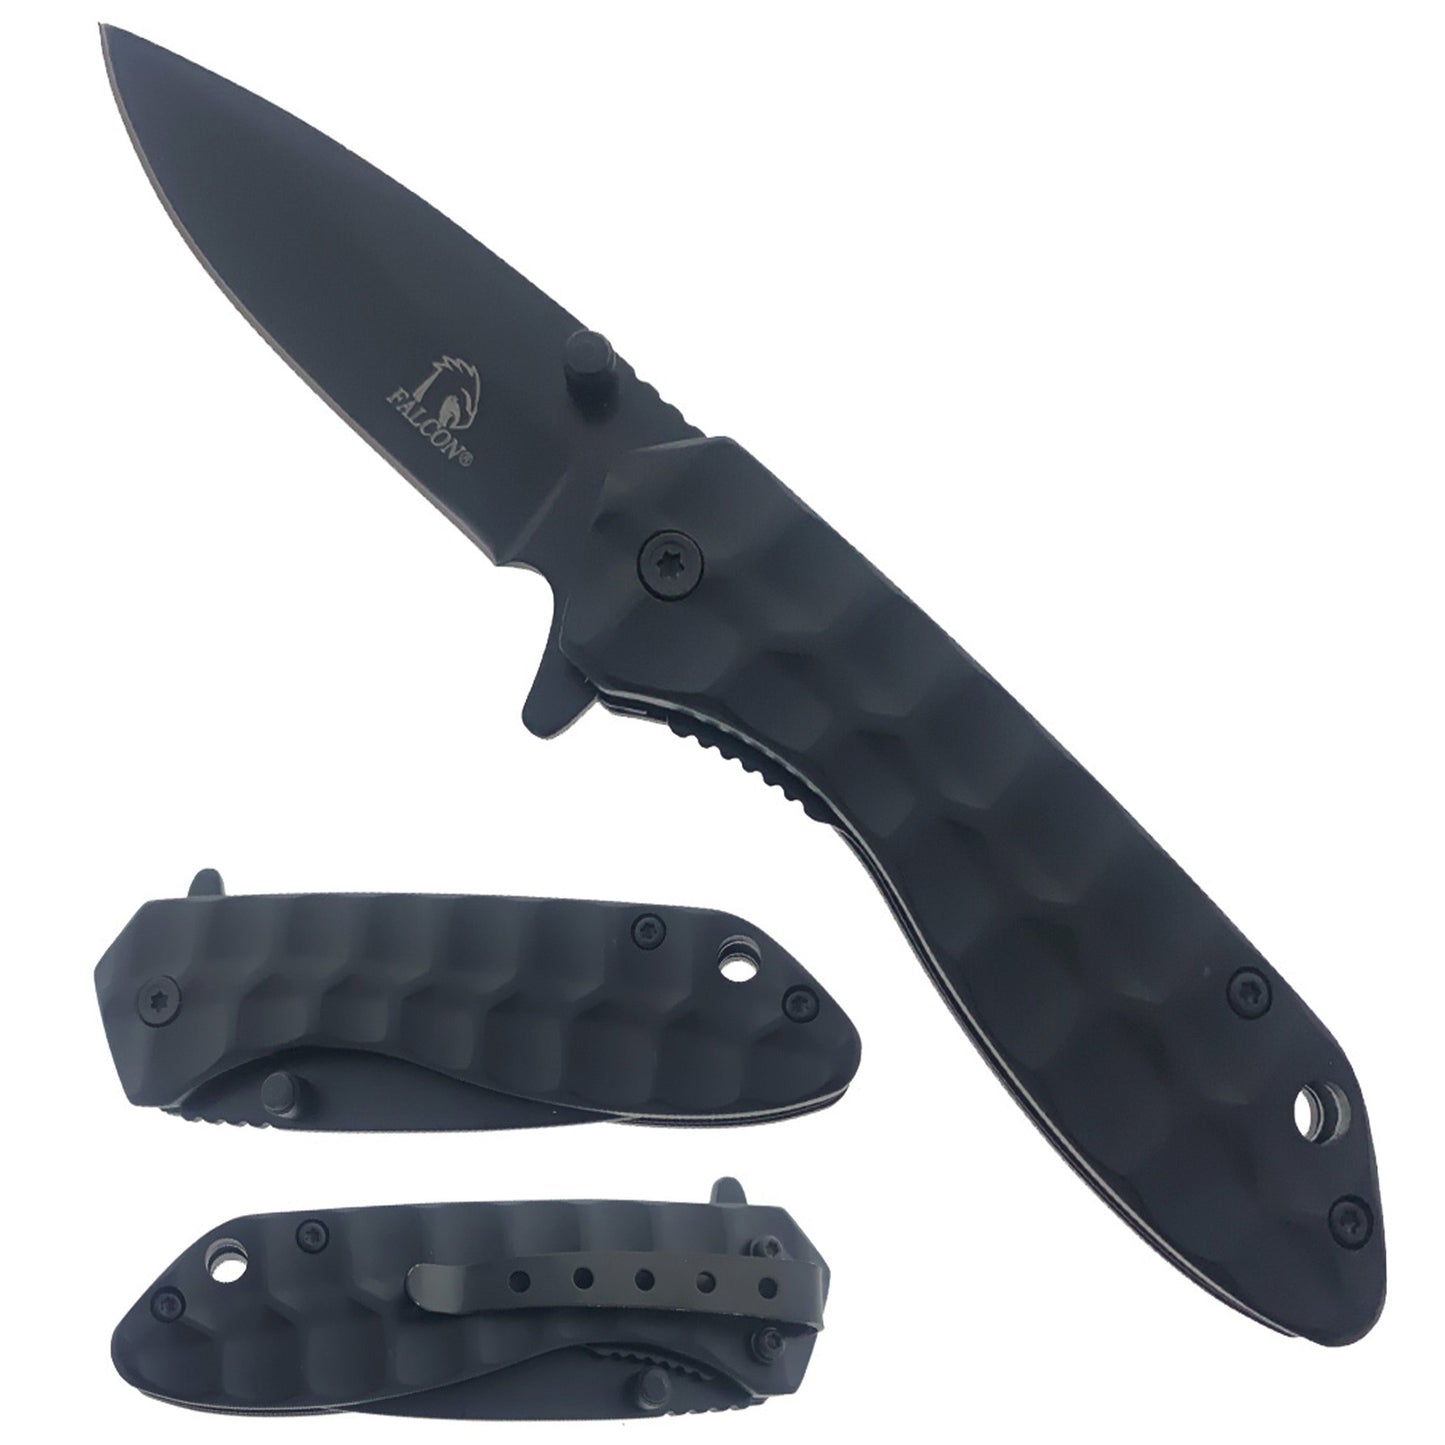 Falcon Black Semi-Automatic Spring Assisted Pocket Knife